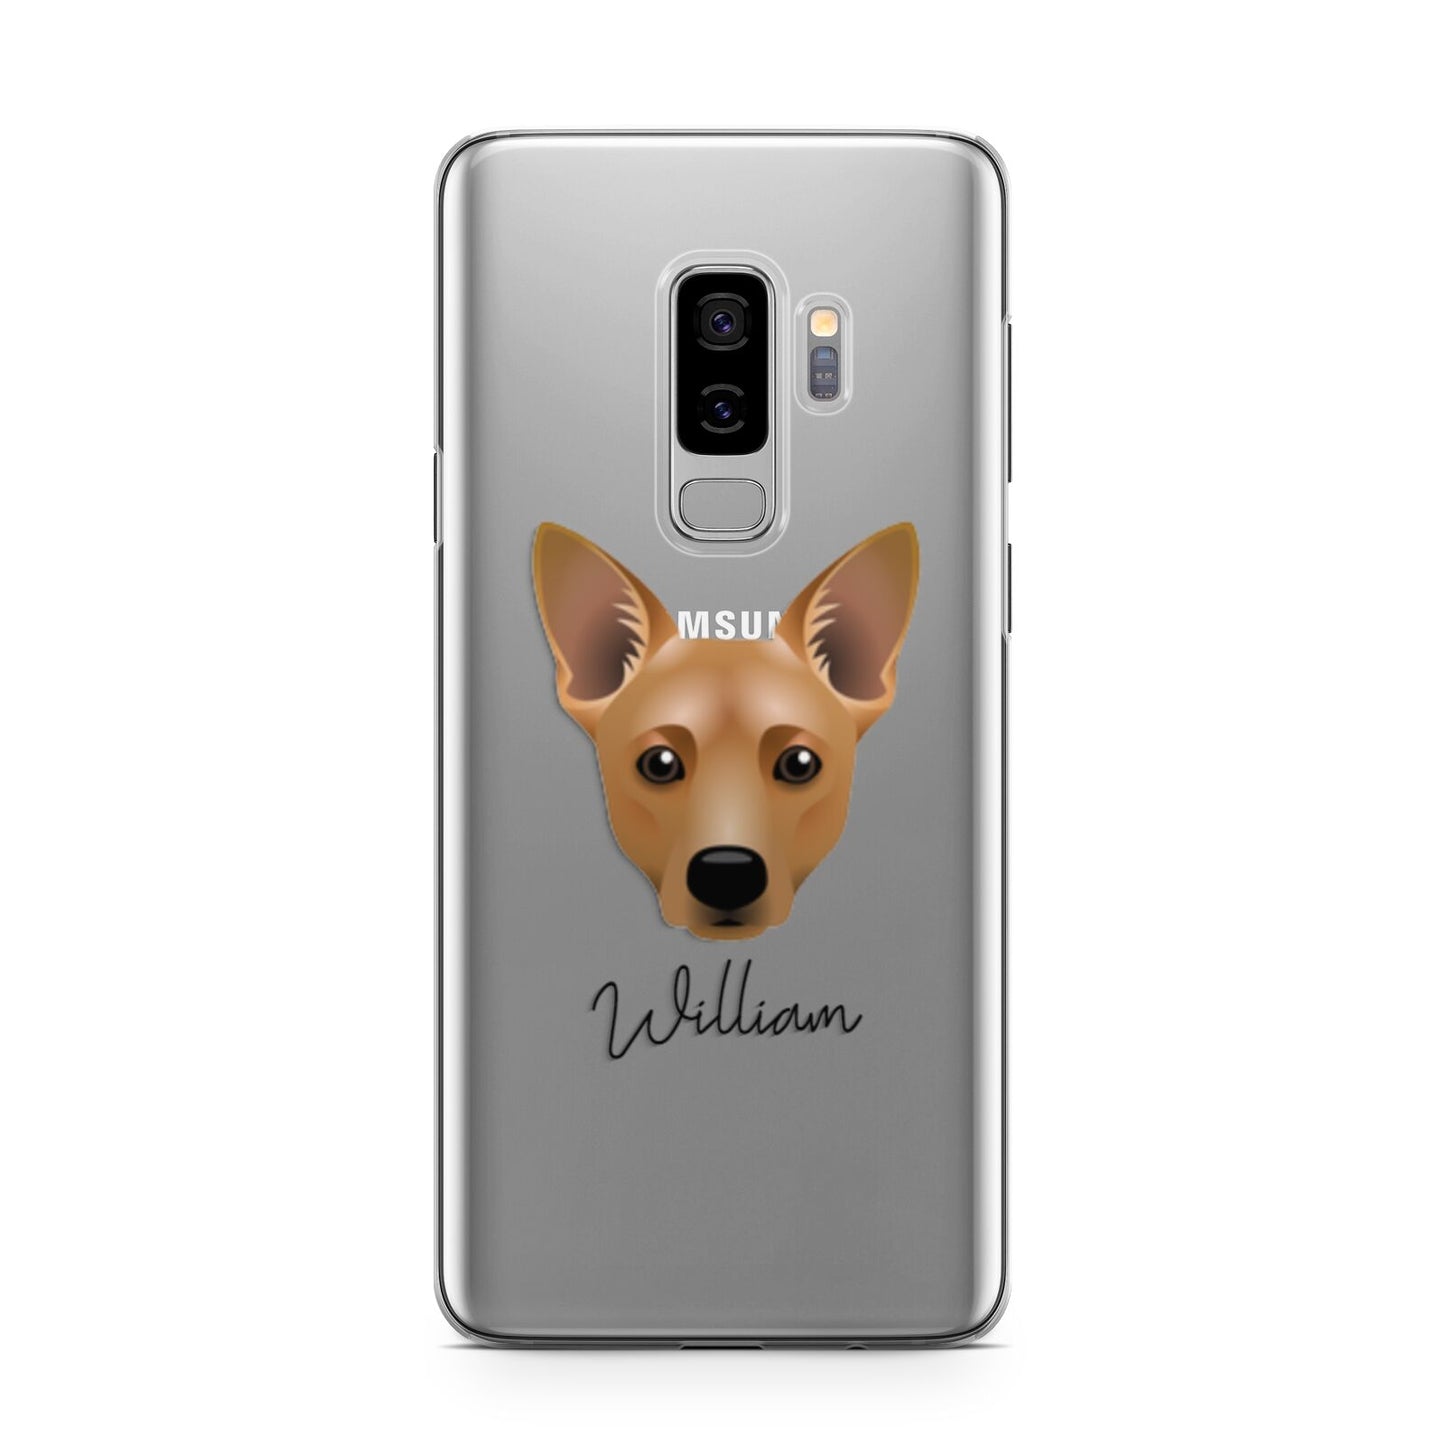 Cojack Personalised Samsung Galaxy S9 Plus Case on Silver phone